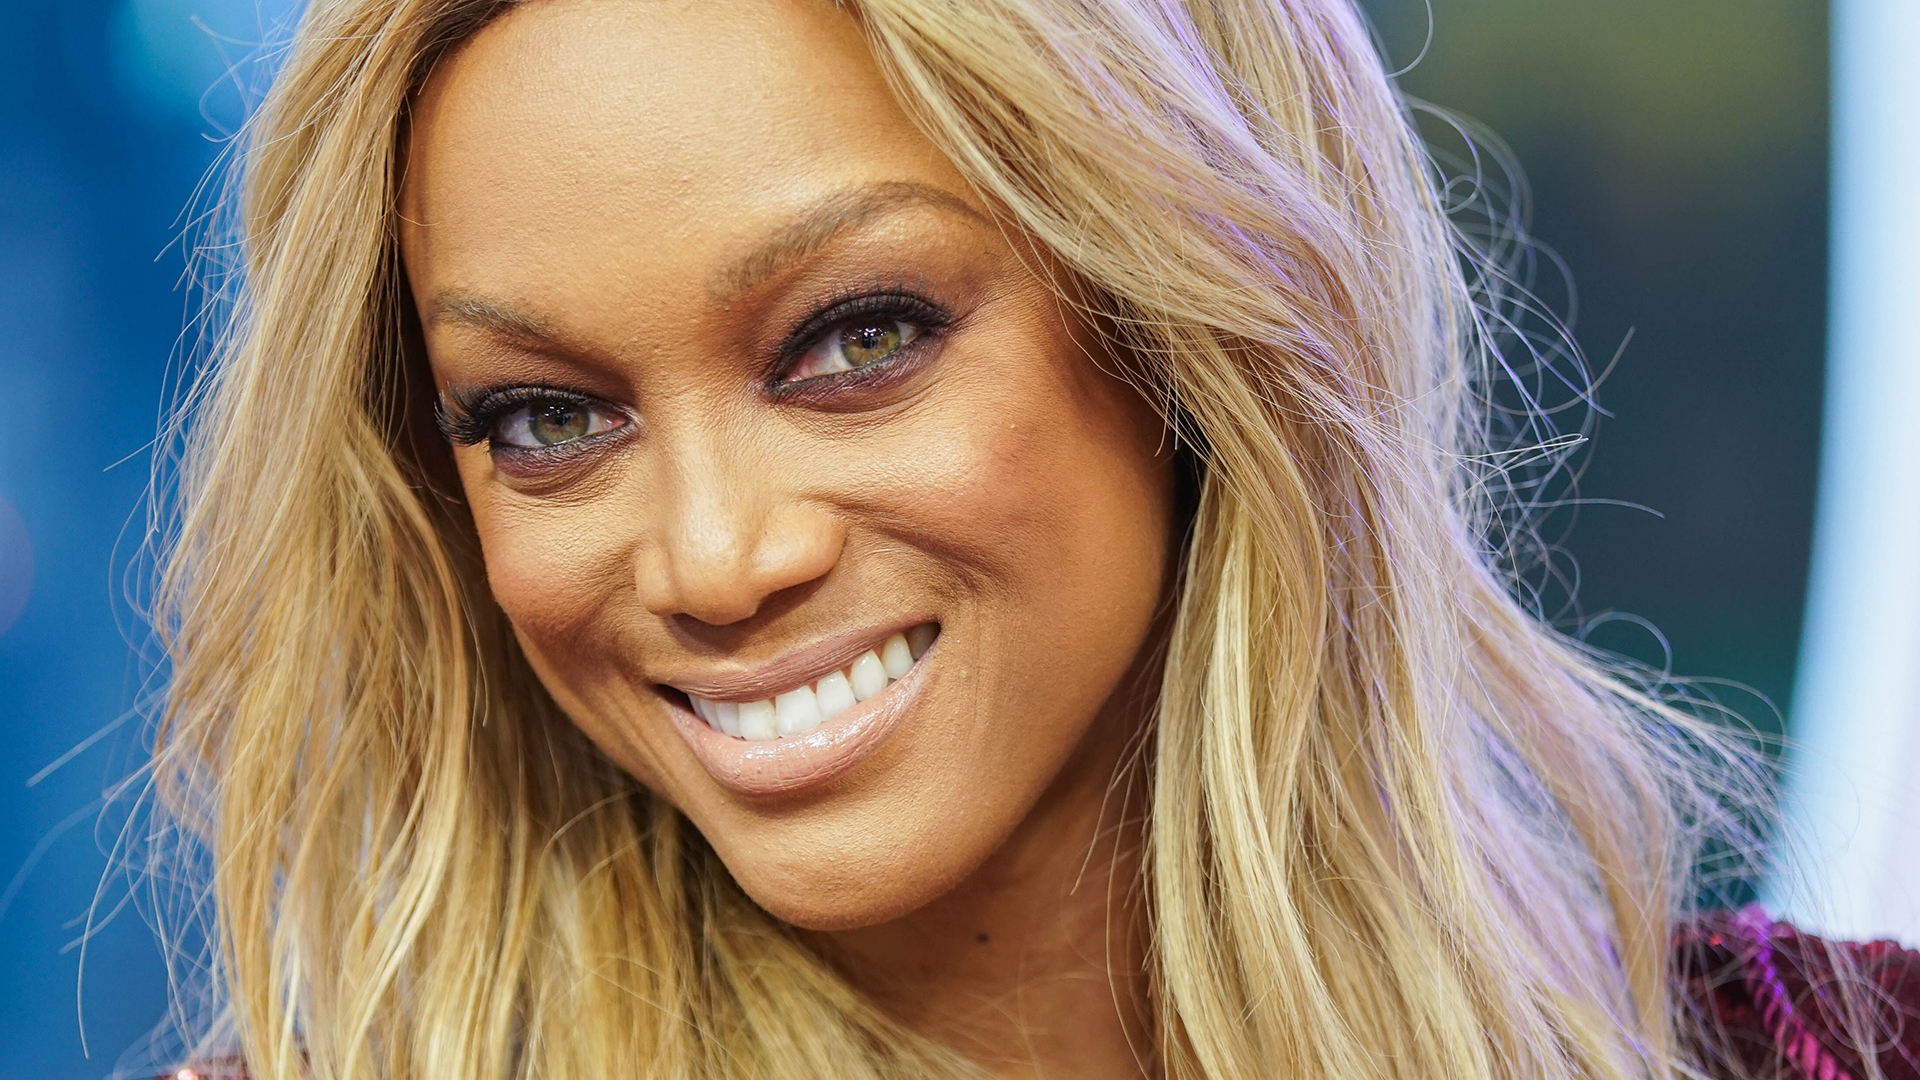 Tyra Banks Had A Nose Job Plastic Surgery In Early Career